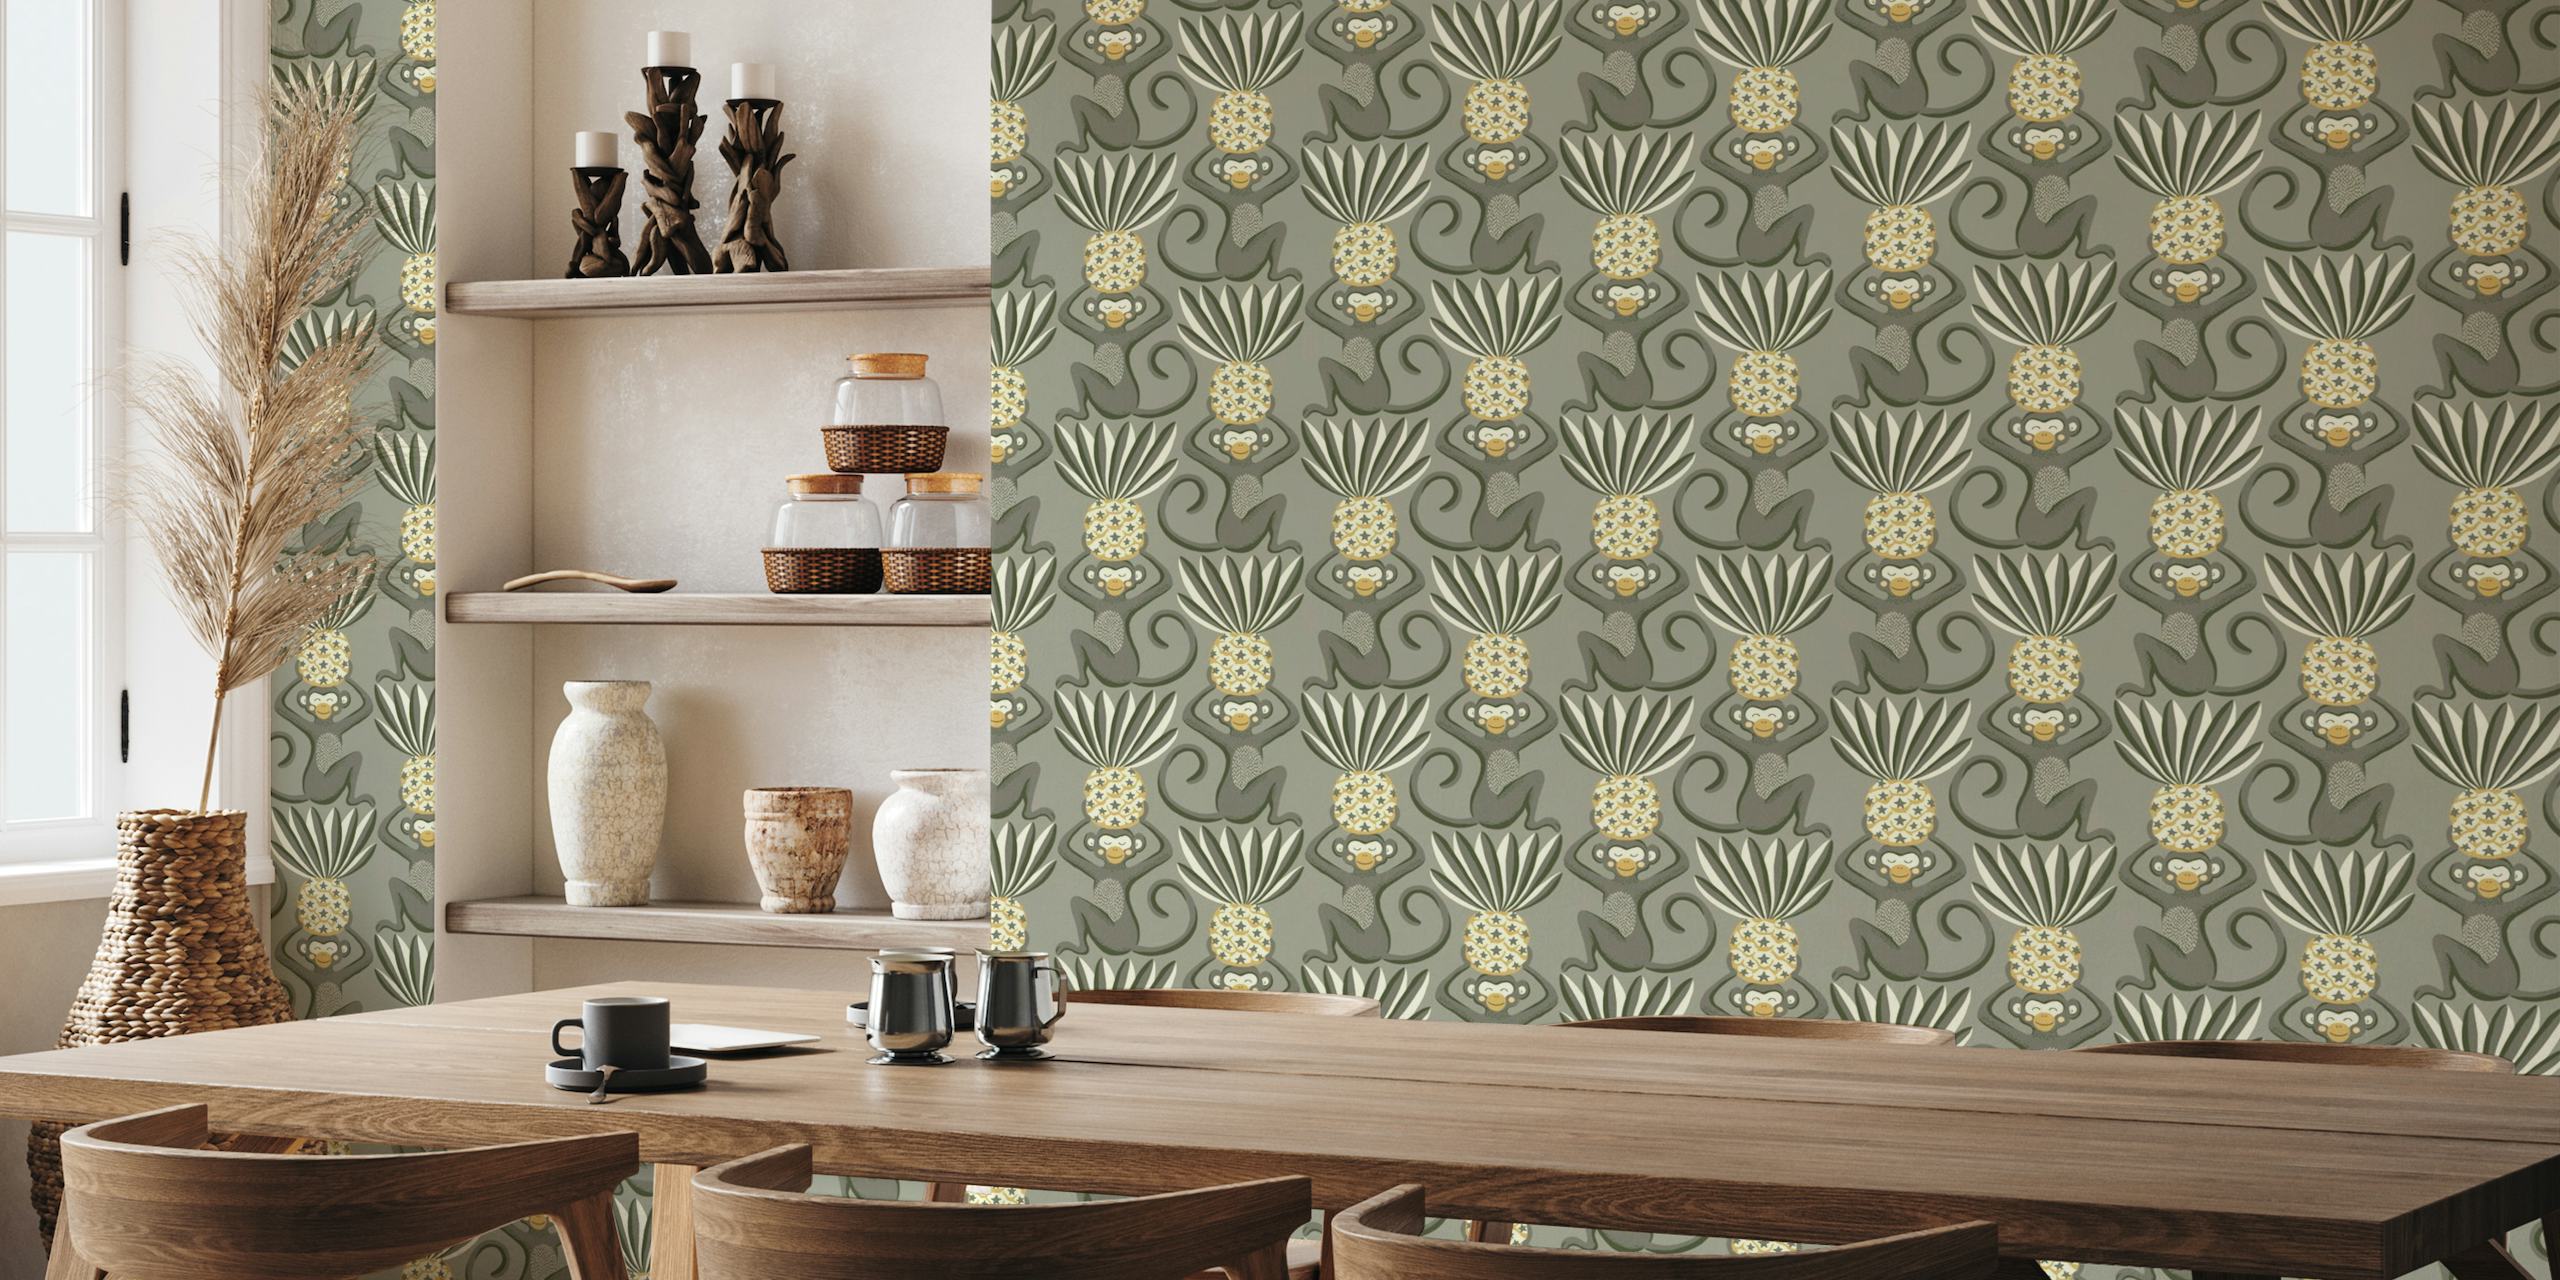 Monkeys and pineapples - brown and yellow wallpaper